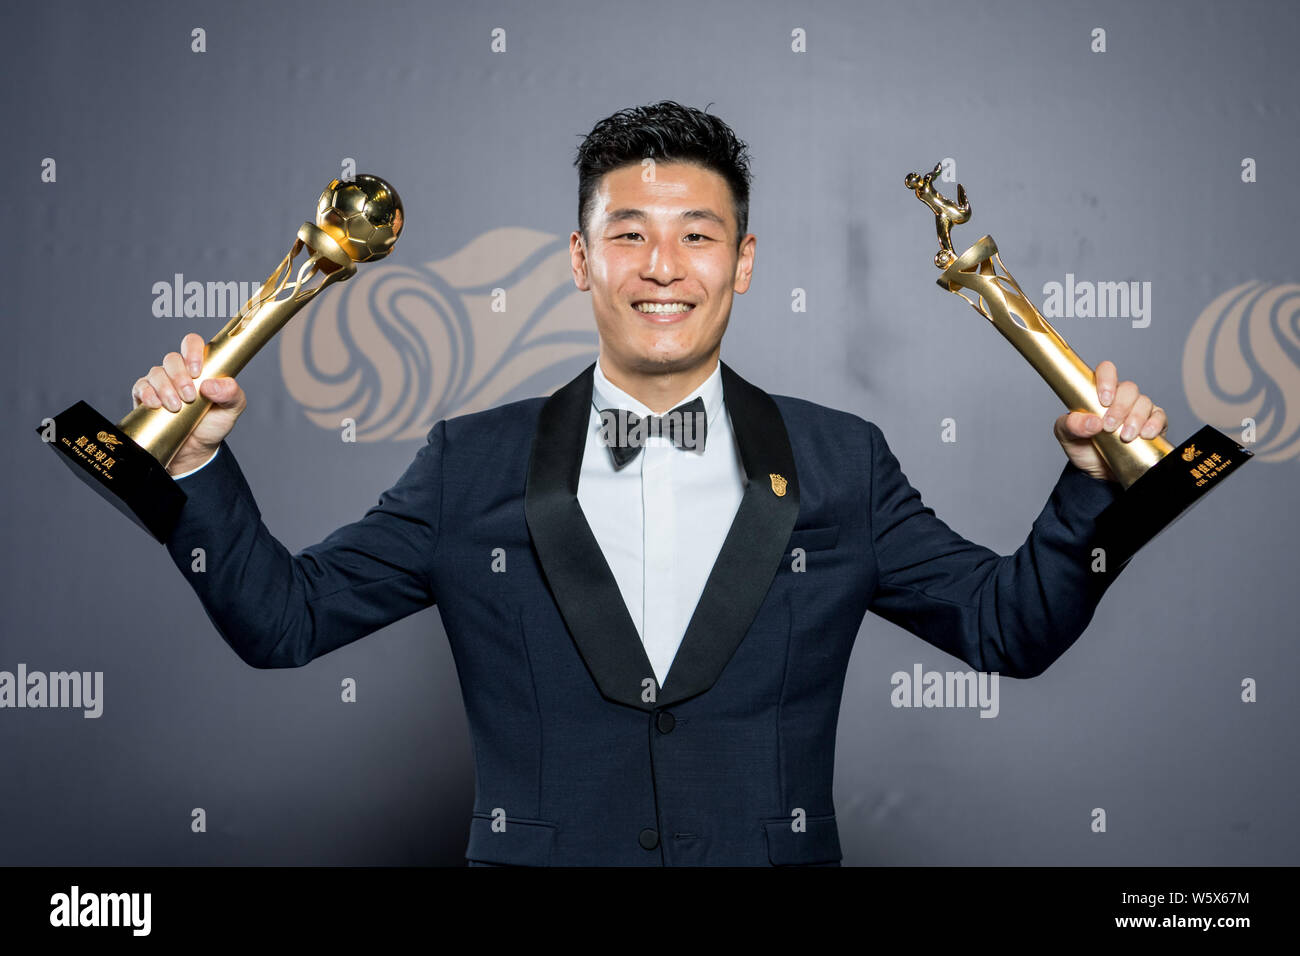 Chinese football player Wu Lei of Shanghai SIPG poses with trophys for the CSL Top Scorer and Player of the Year Awards at the 2018 Chinese Super Leag Stock Photo